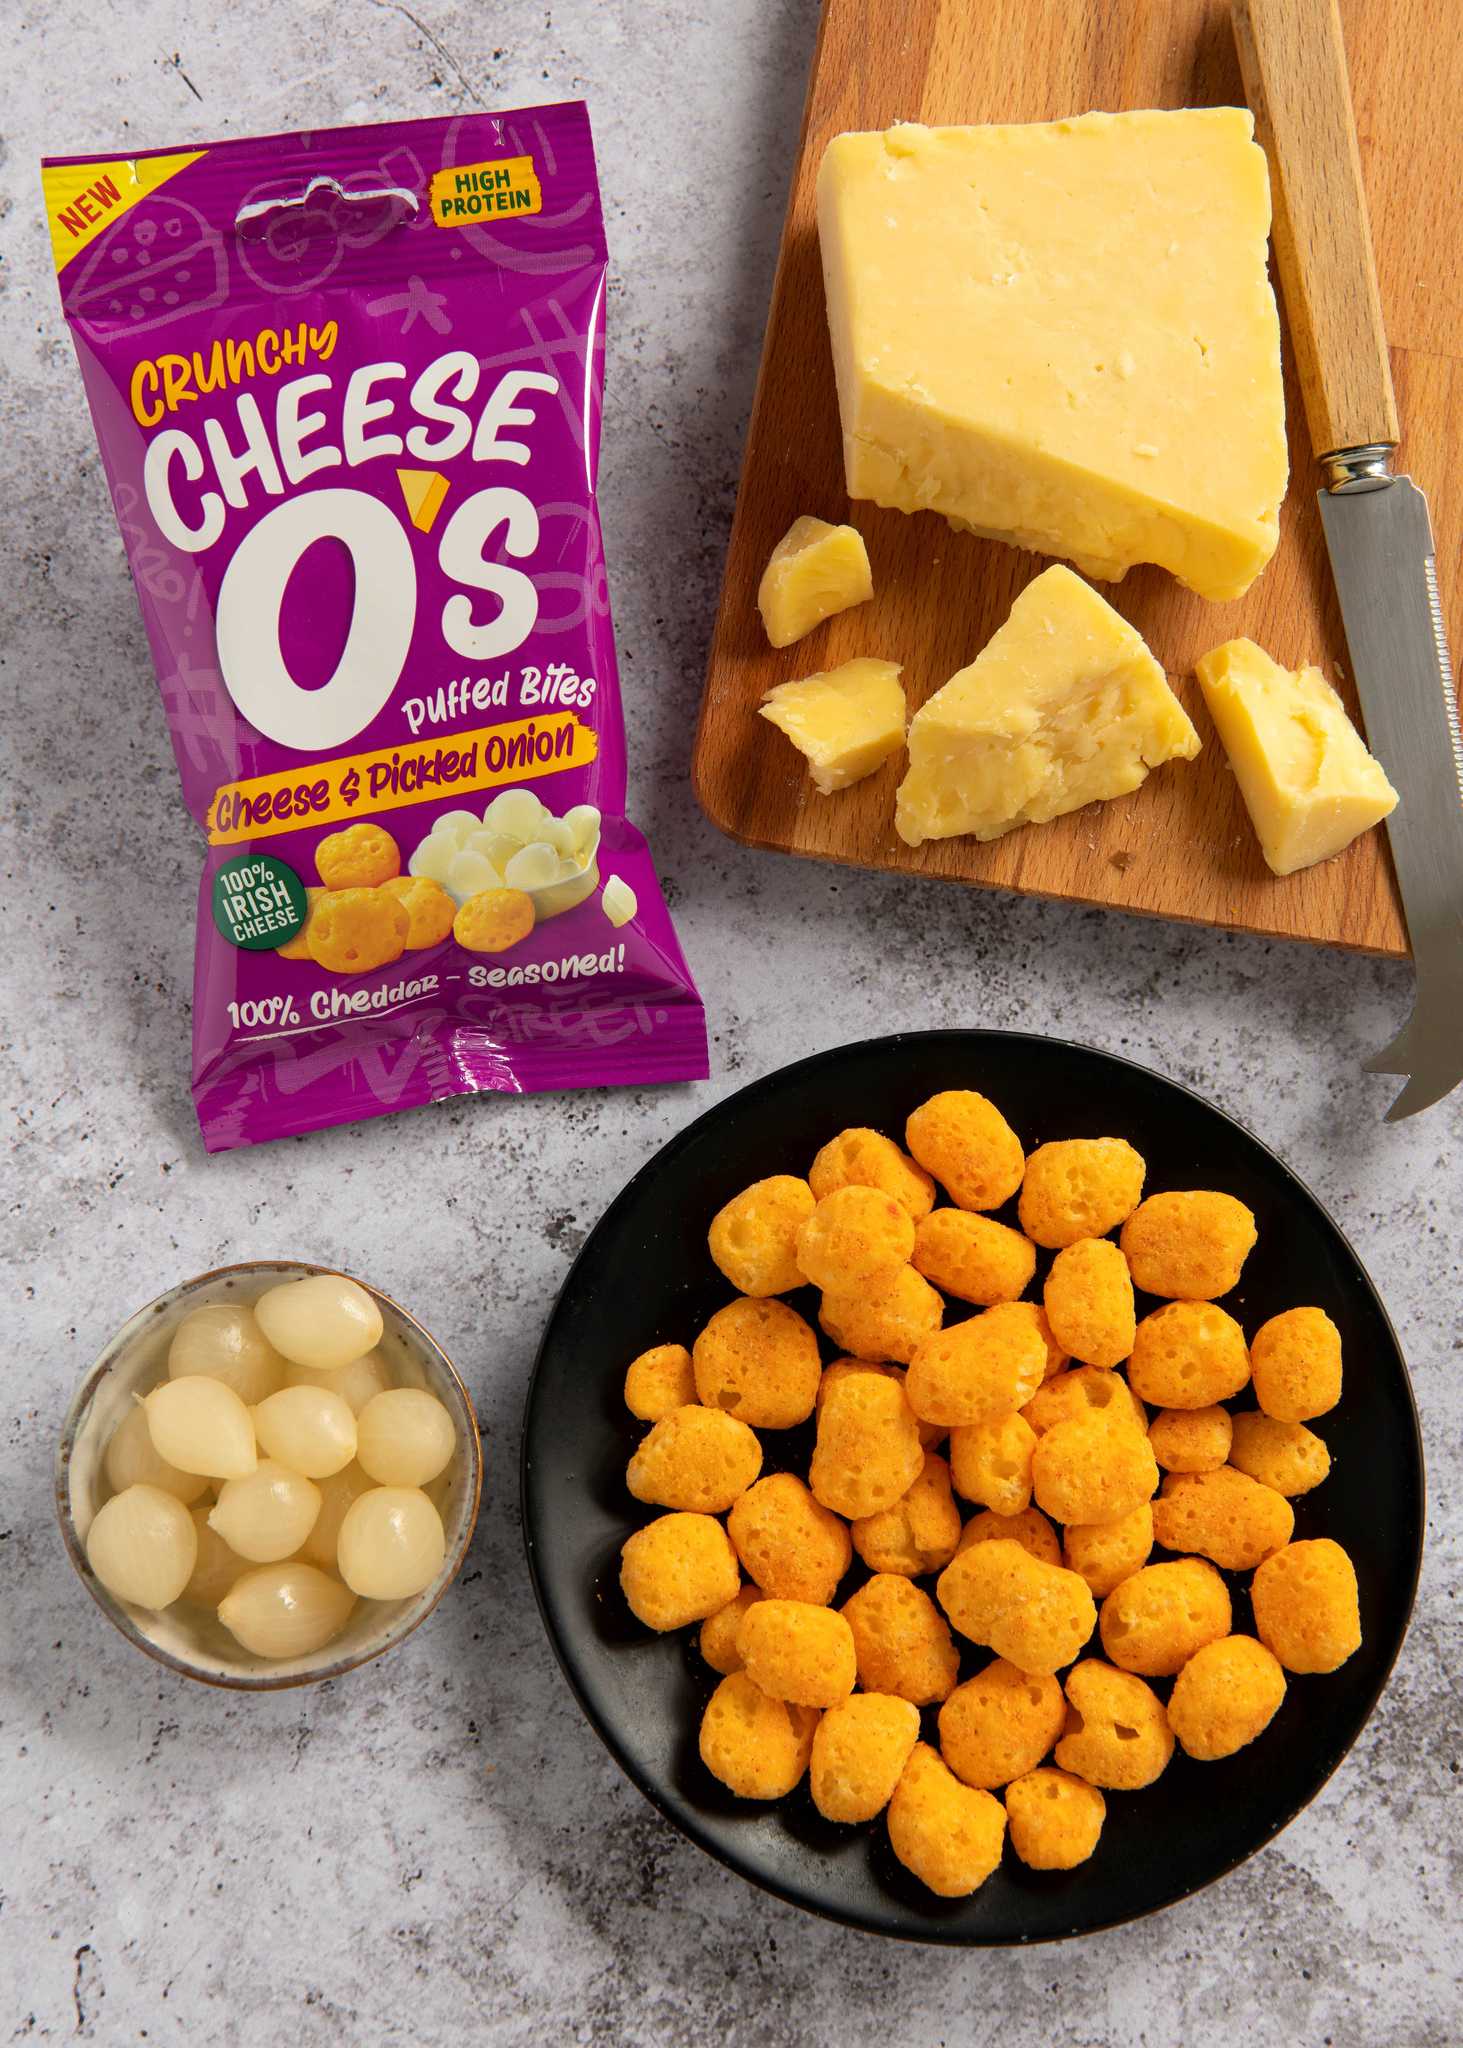 Cheese & Pickled Onion Single Pack (25g)